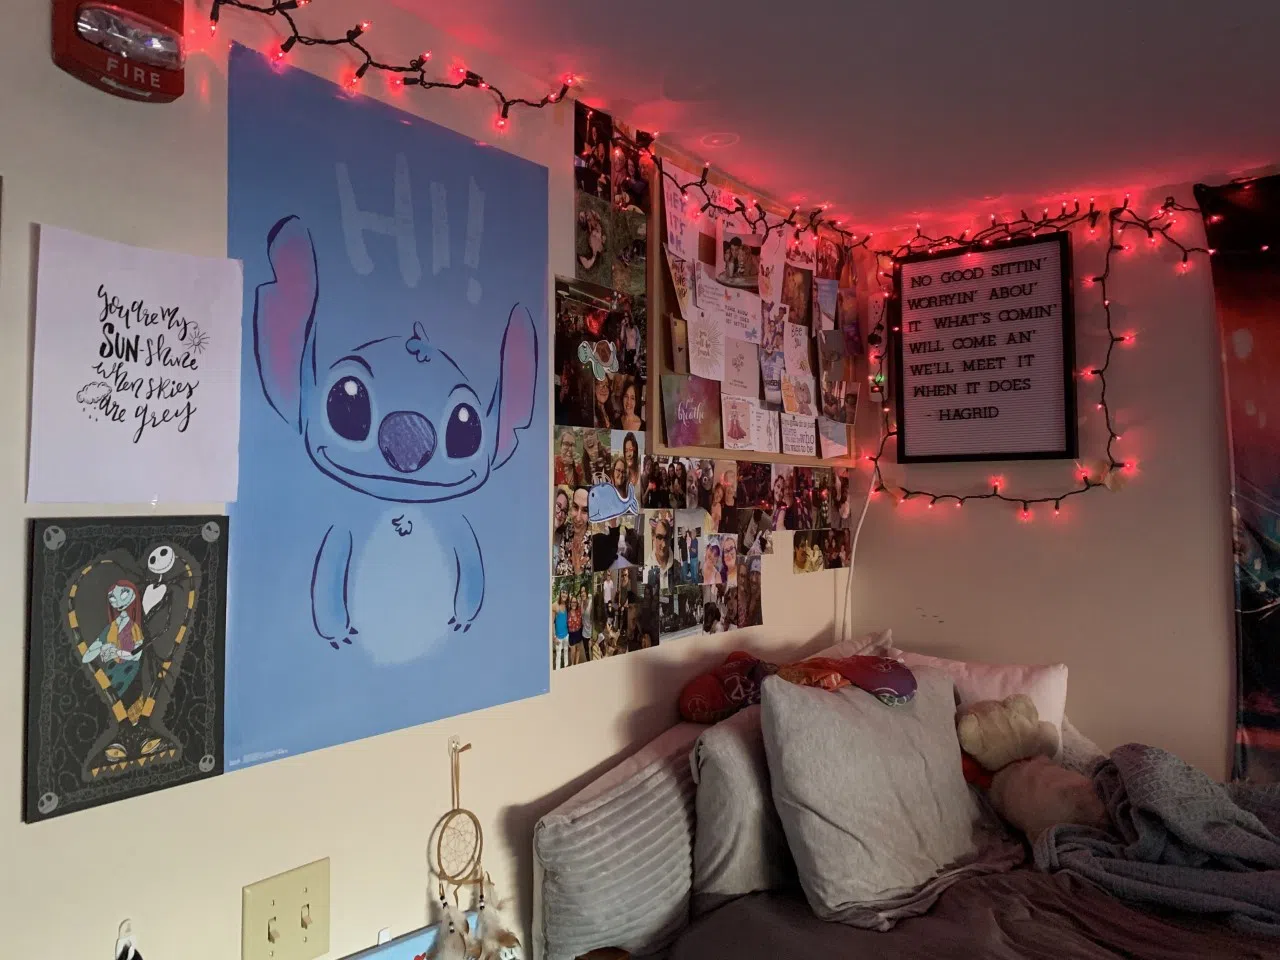 Colorful dorm room decorated with lights, posters, etc.